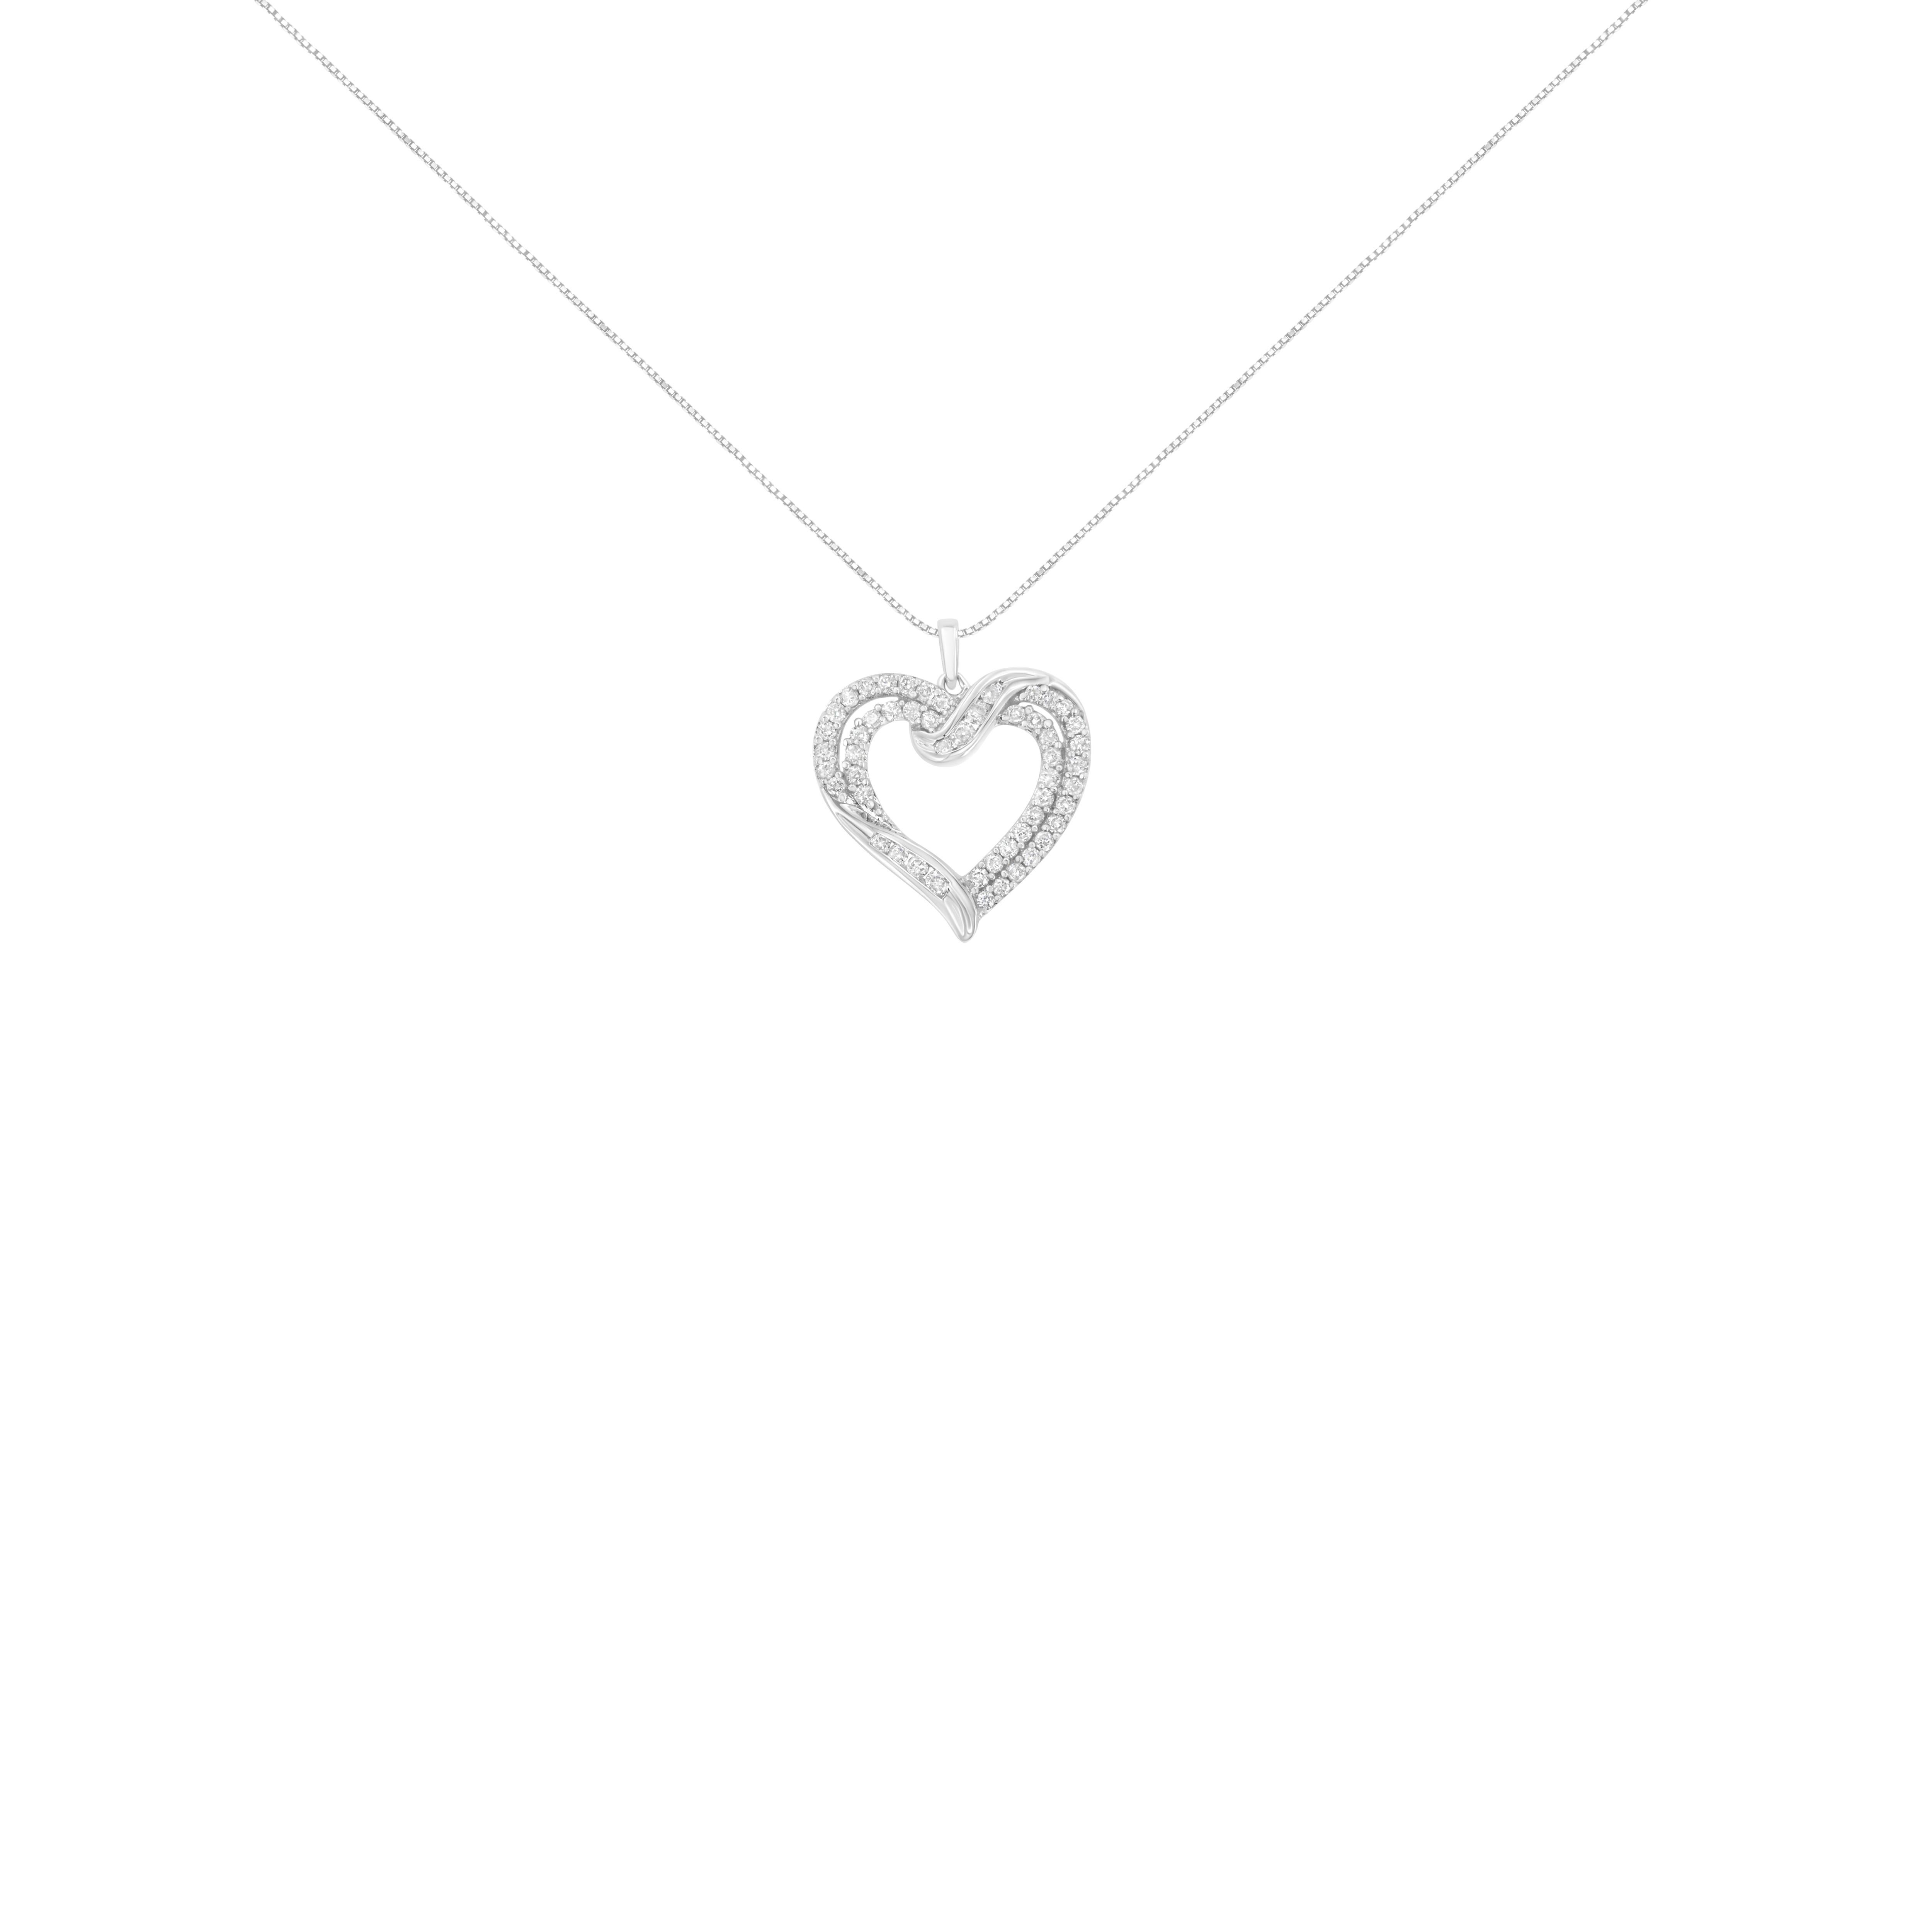 Delicate and elegant, this sterling silver heart pendant features 1.00 cttw of diamonds. Cool sterling silver ribbons studded with glittering round cut diamonds intertwine and create a flowing double heart cutout. The metal is genuine .925 sterling